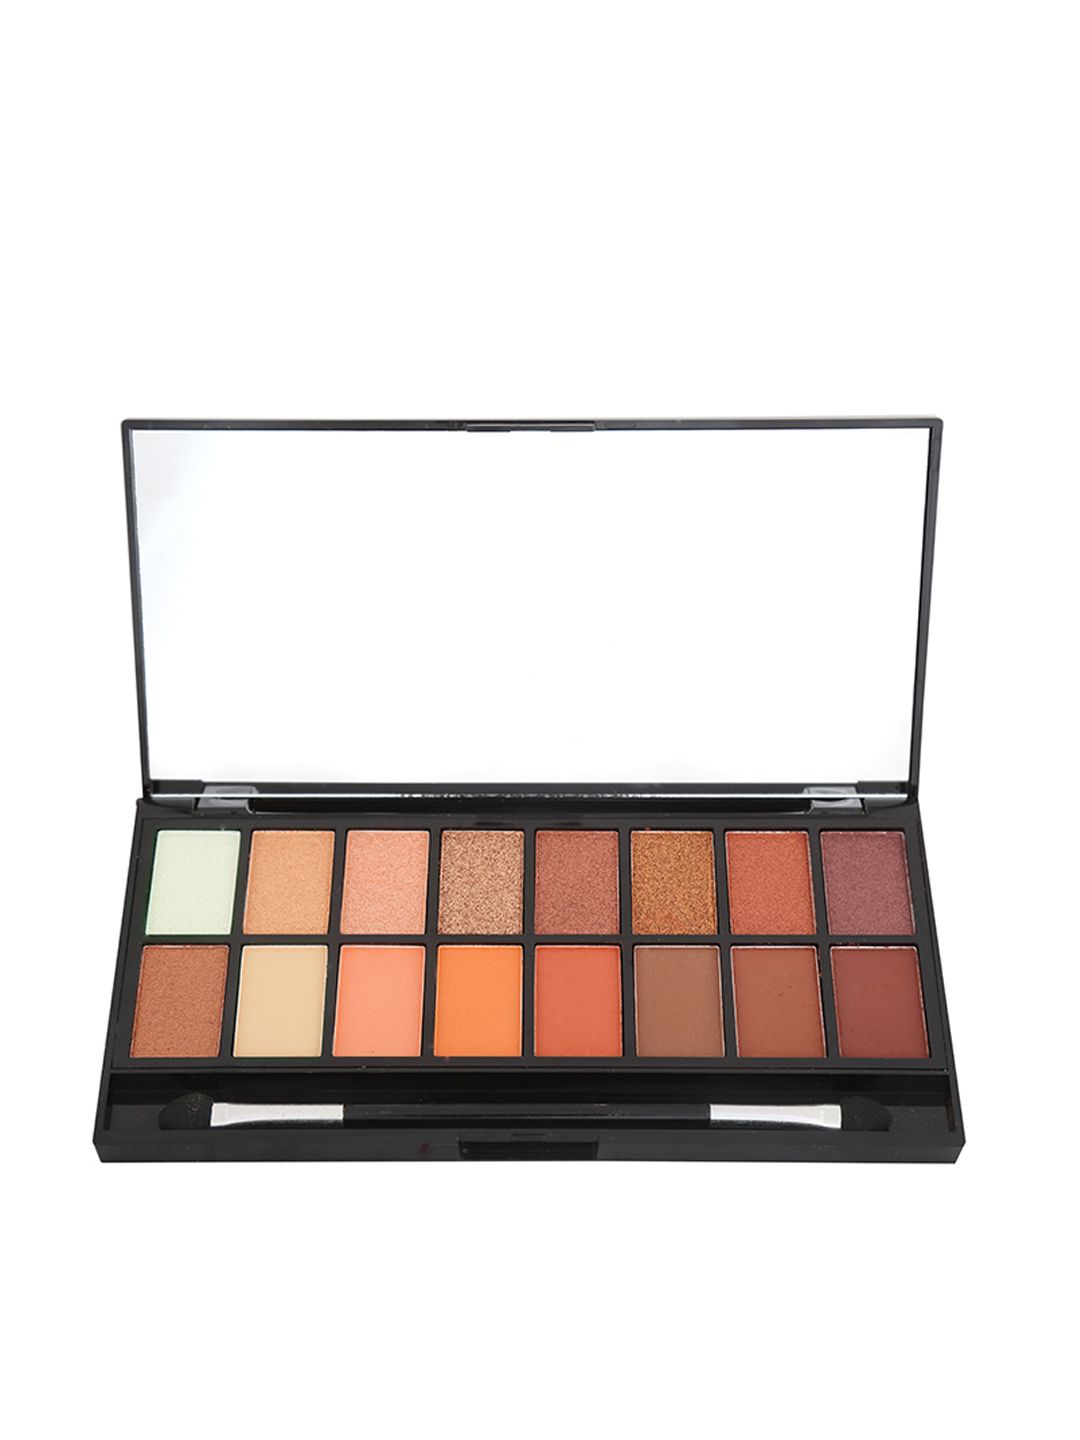 Miss Claire 2 Ultra Glow Eyeshadow Palette 16 g Price in India